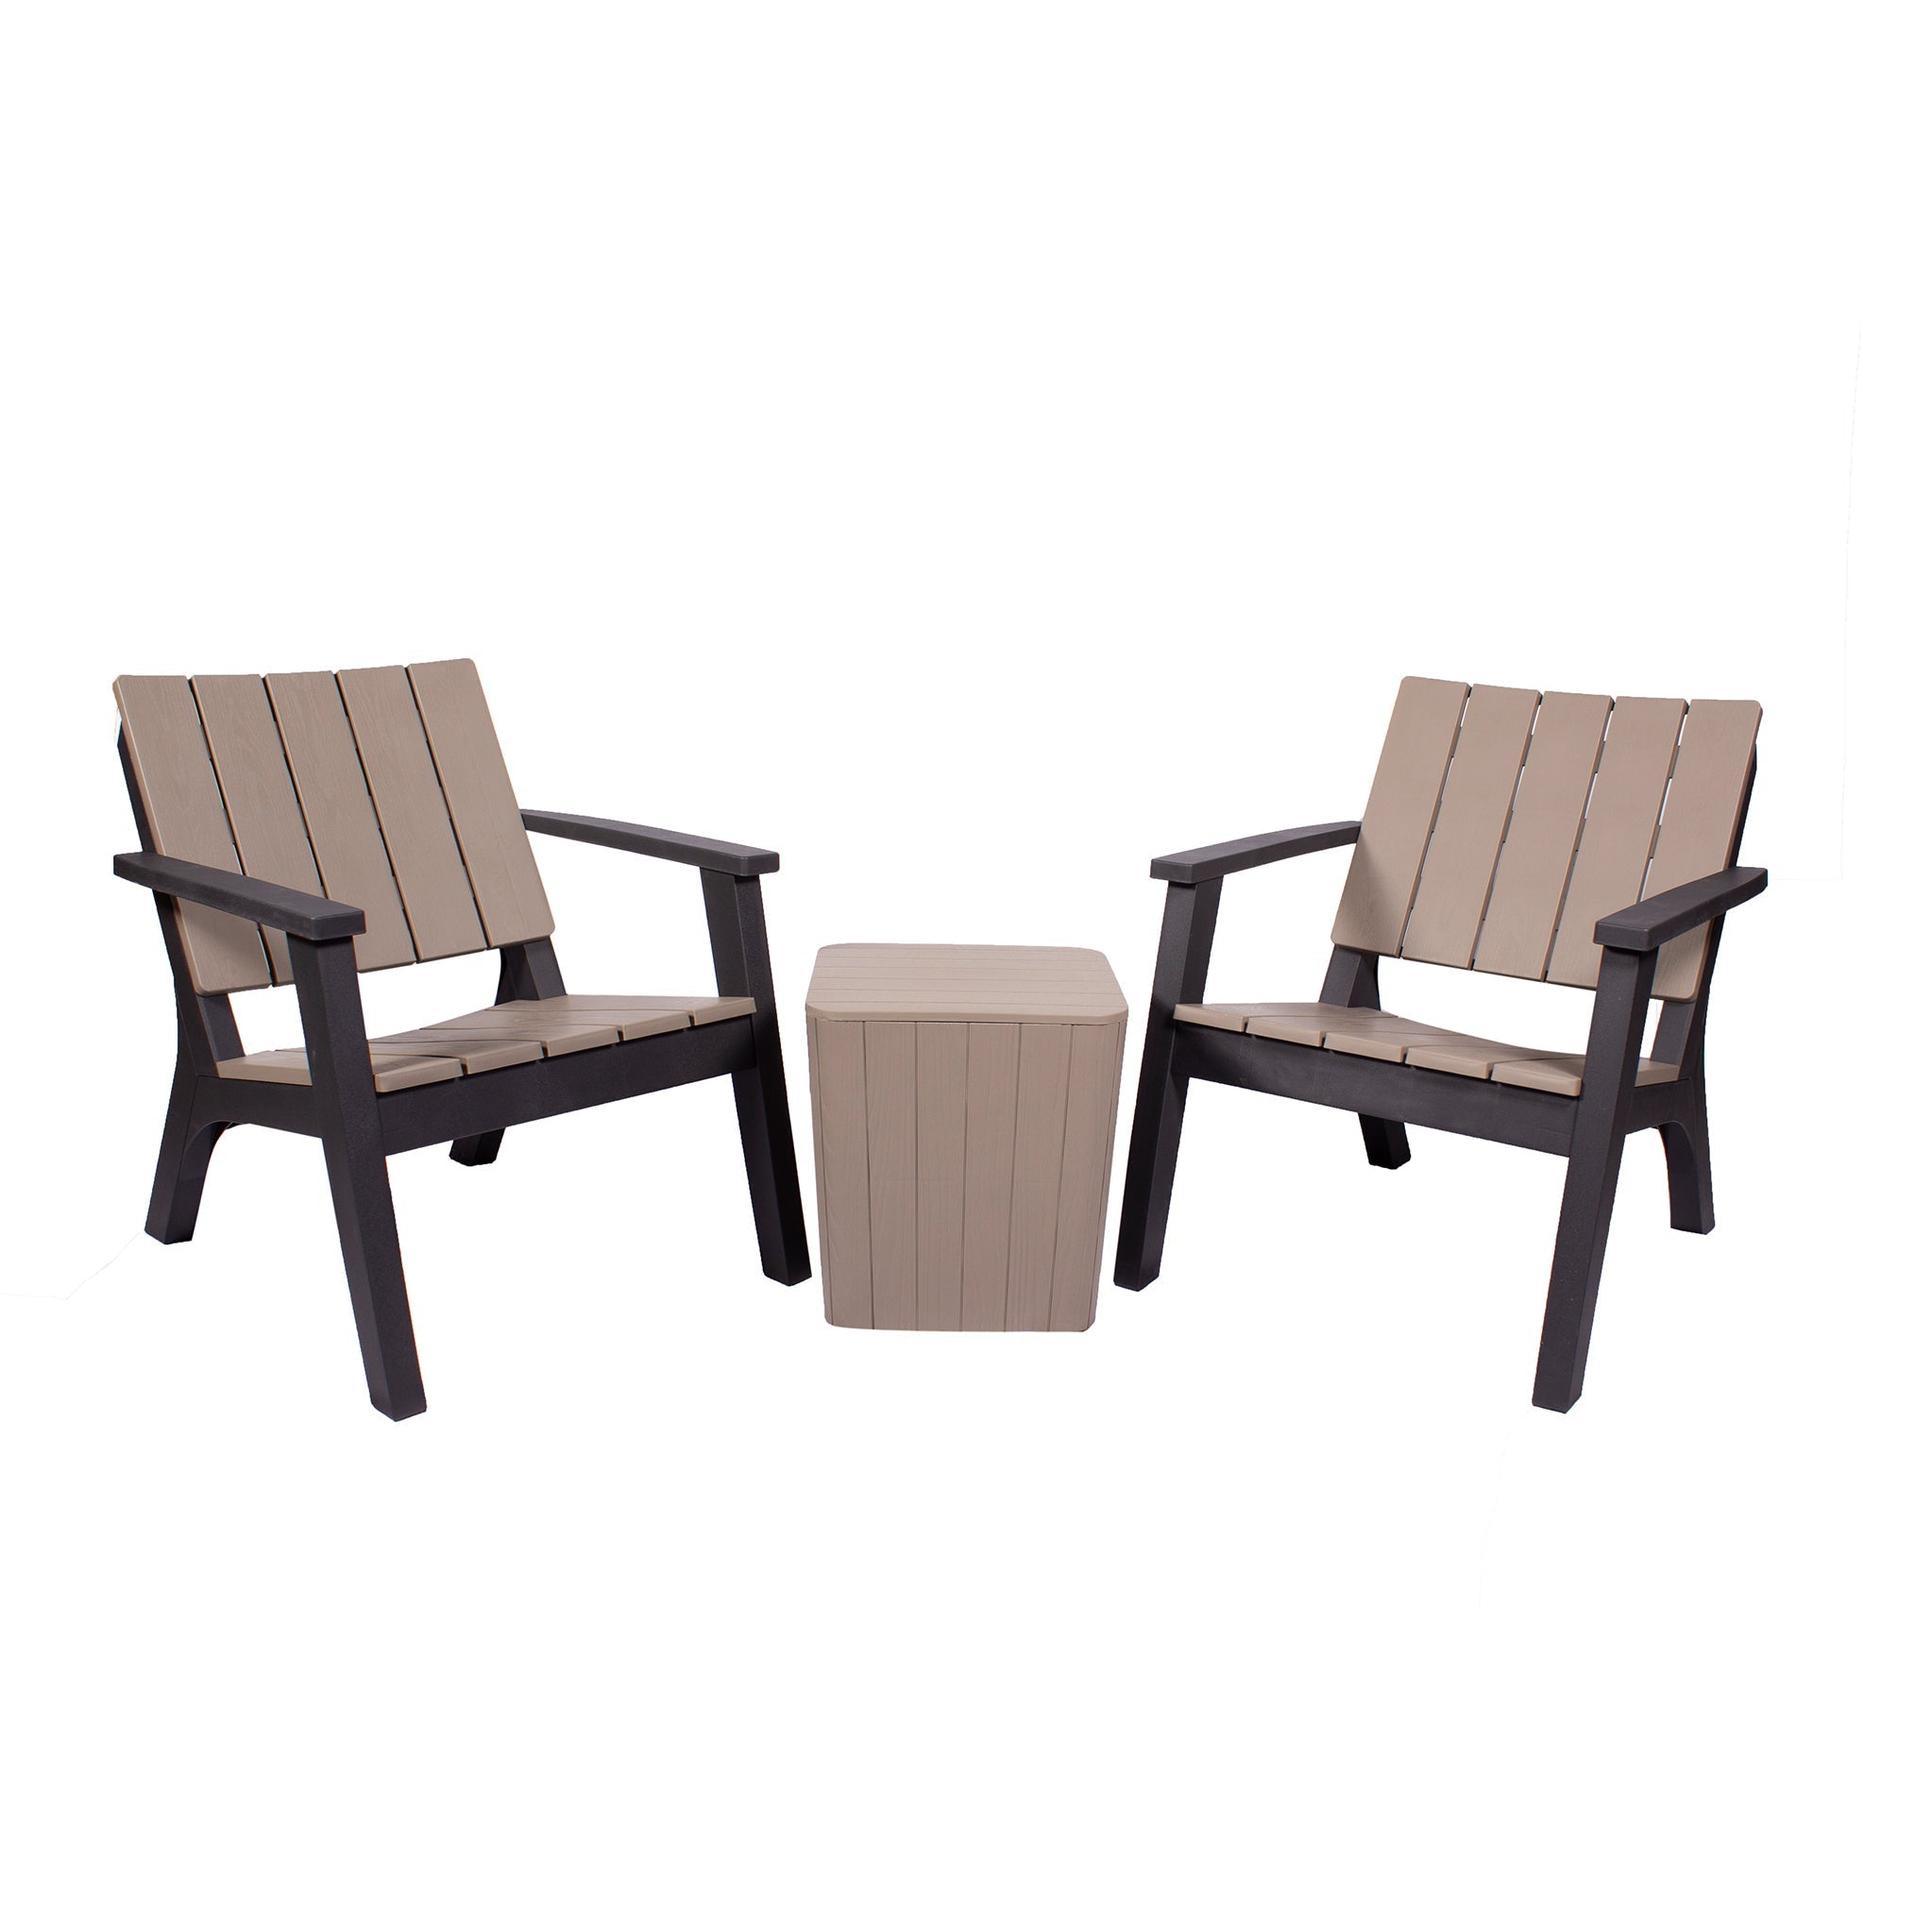 Faro 2 Seat Outdoor Garden Bistro Set With Coffee Table Roseland